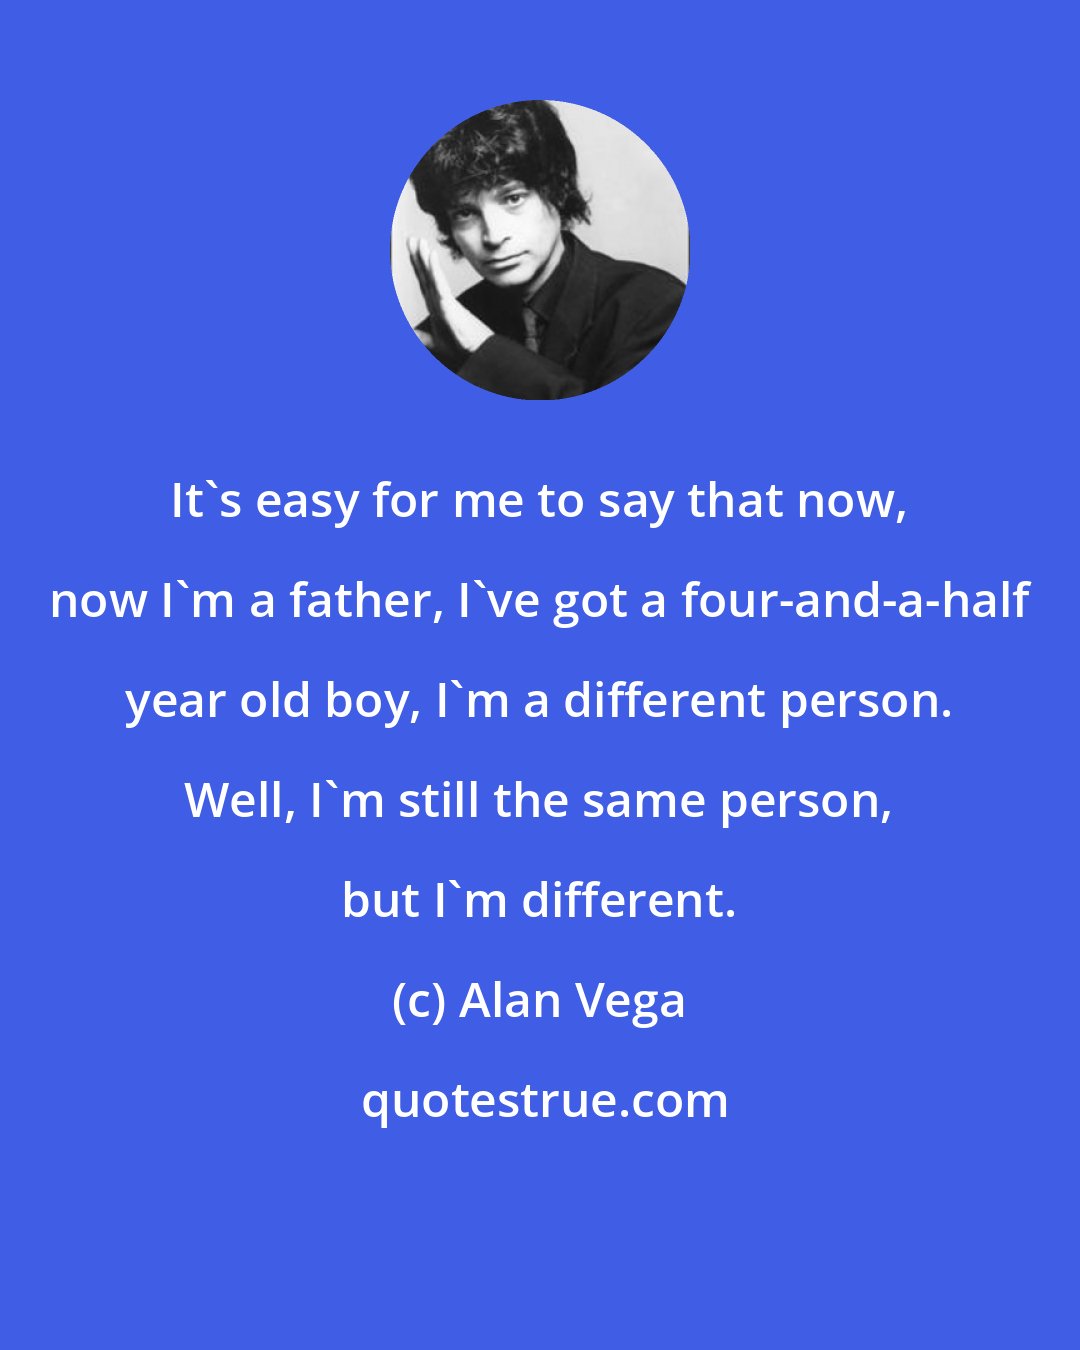 Alan Vega: It's easy for me to say that now, now I'm a father, I've got a four-and-a-half year old boy, I'm a different person. Well, I'm still the same person, but I'm different.